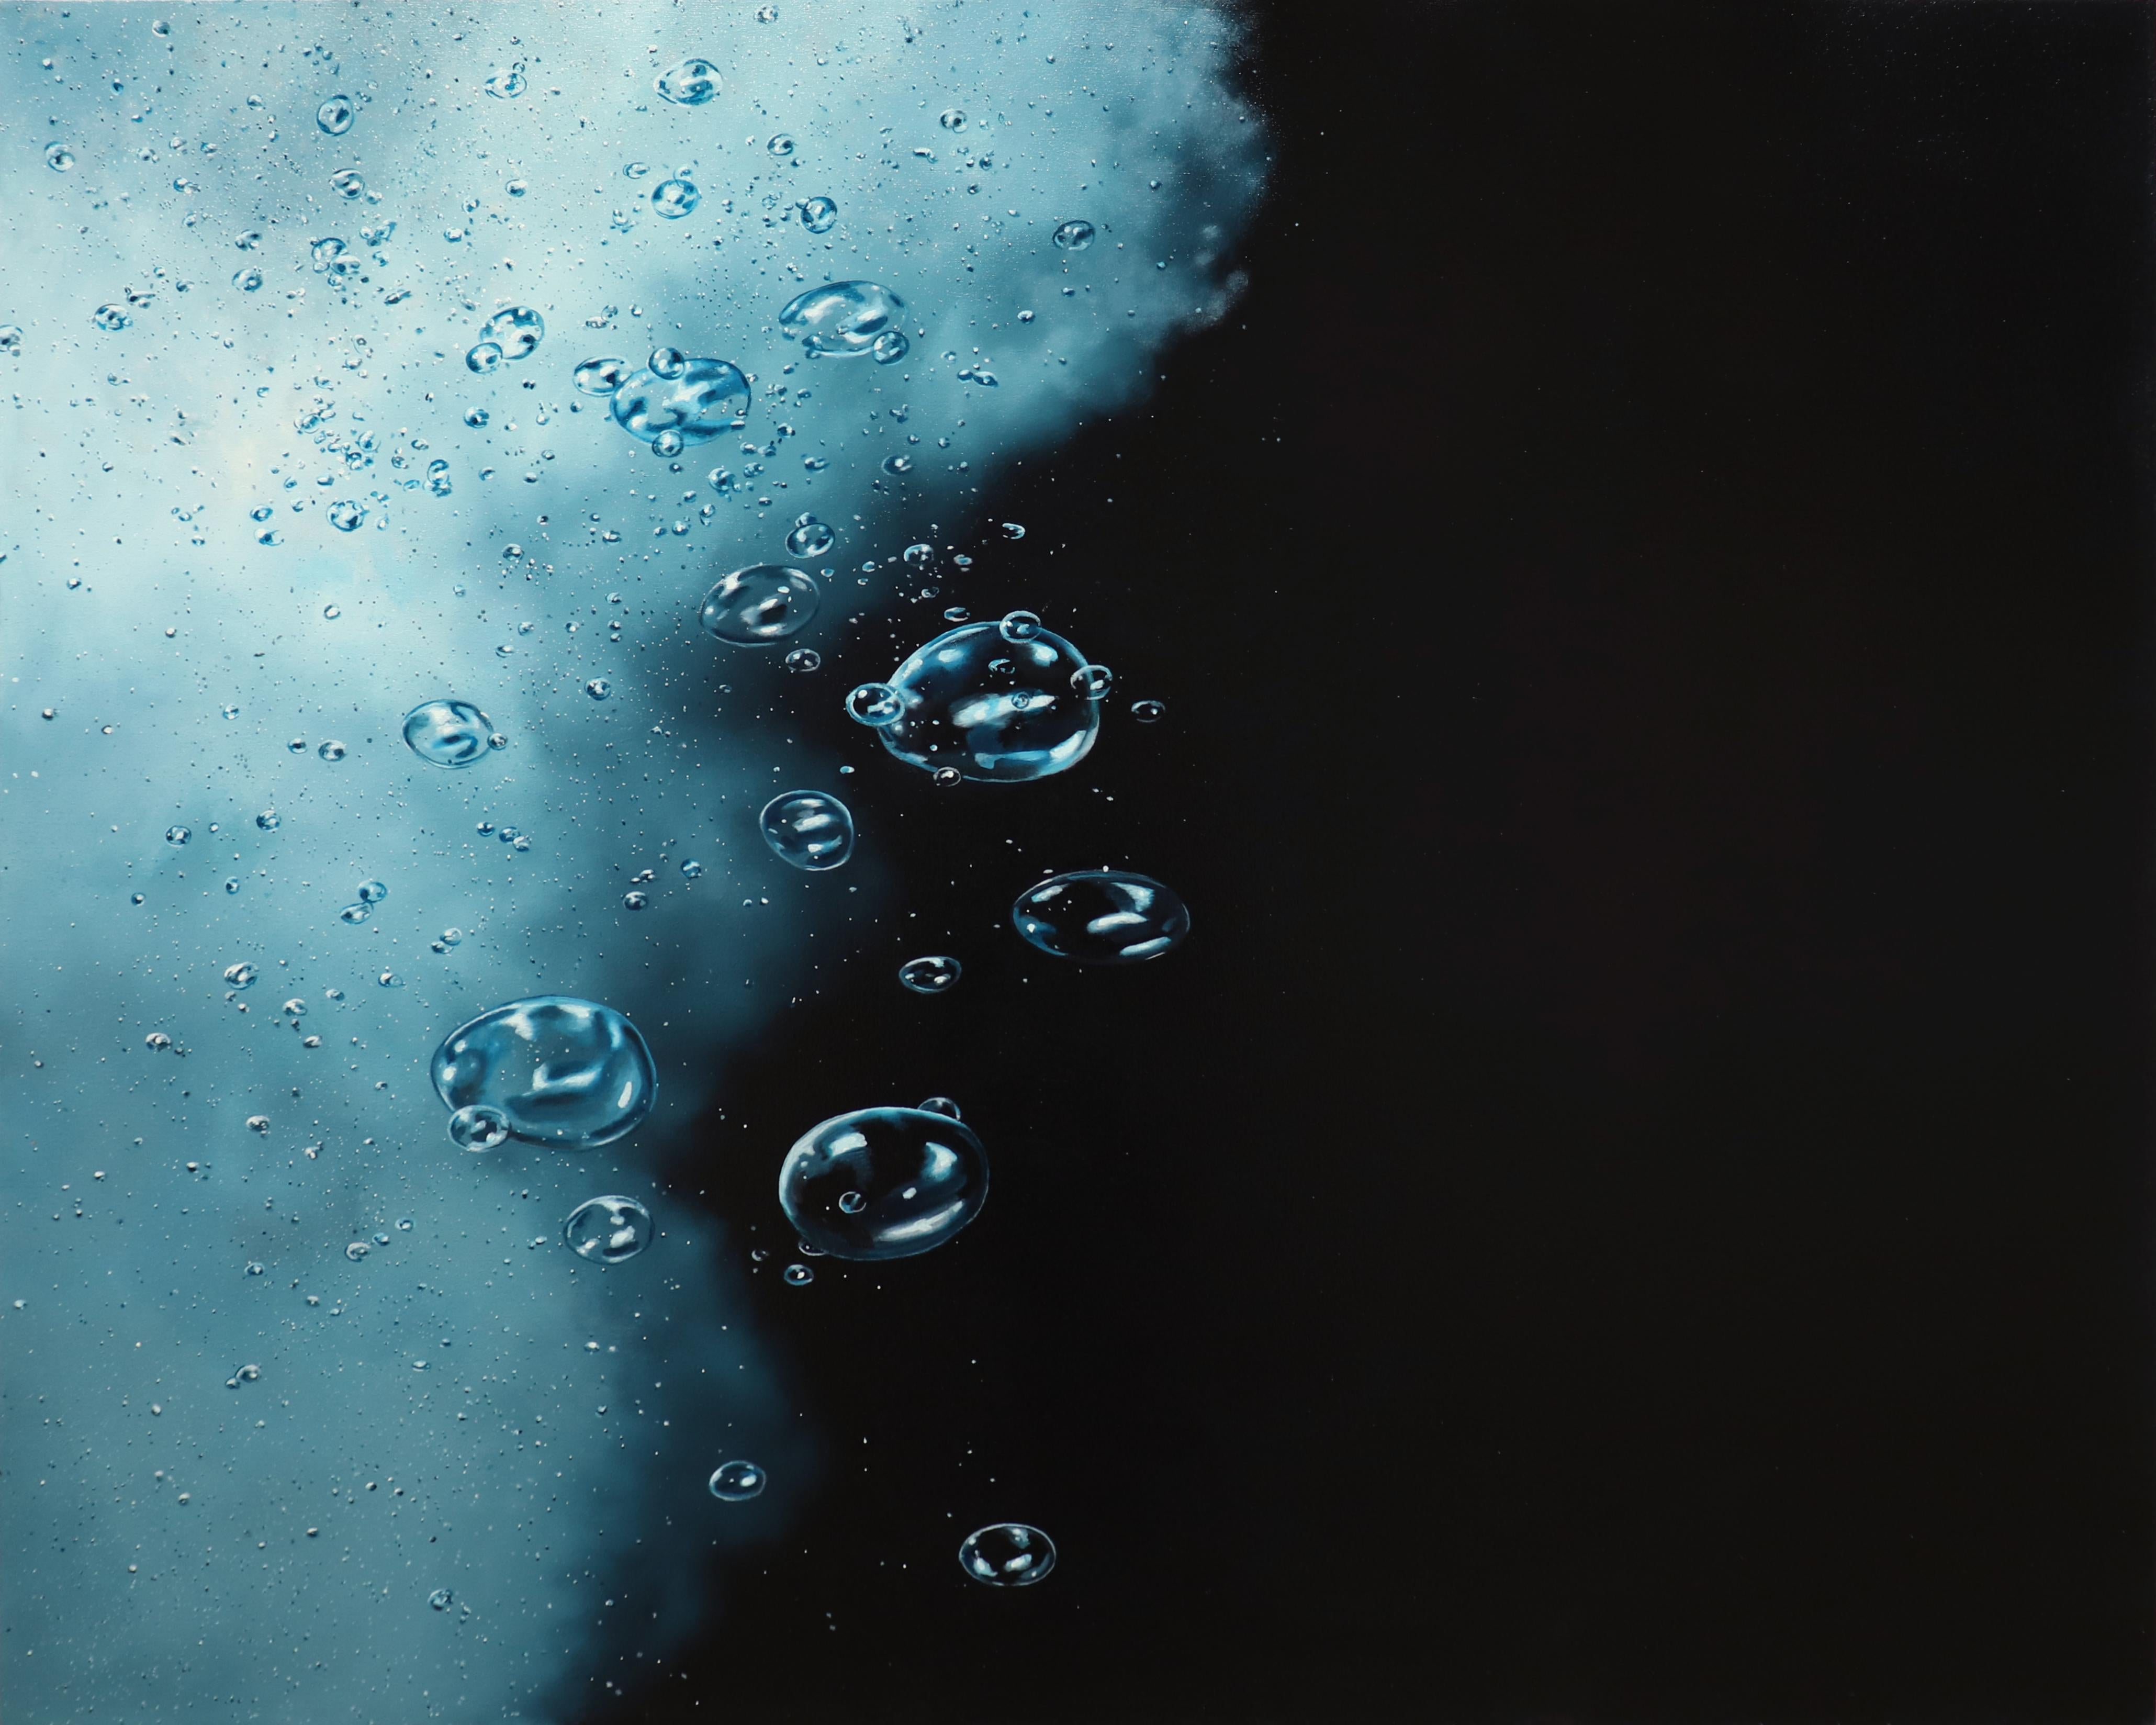 NIGHT RISE - Black and Blue / Bubbles Rising in Water / Deep Ocean - Painting by Eric Zener